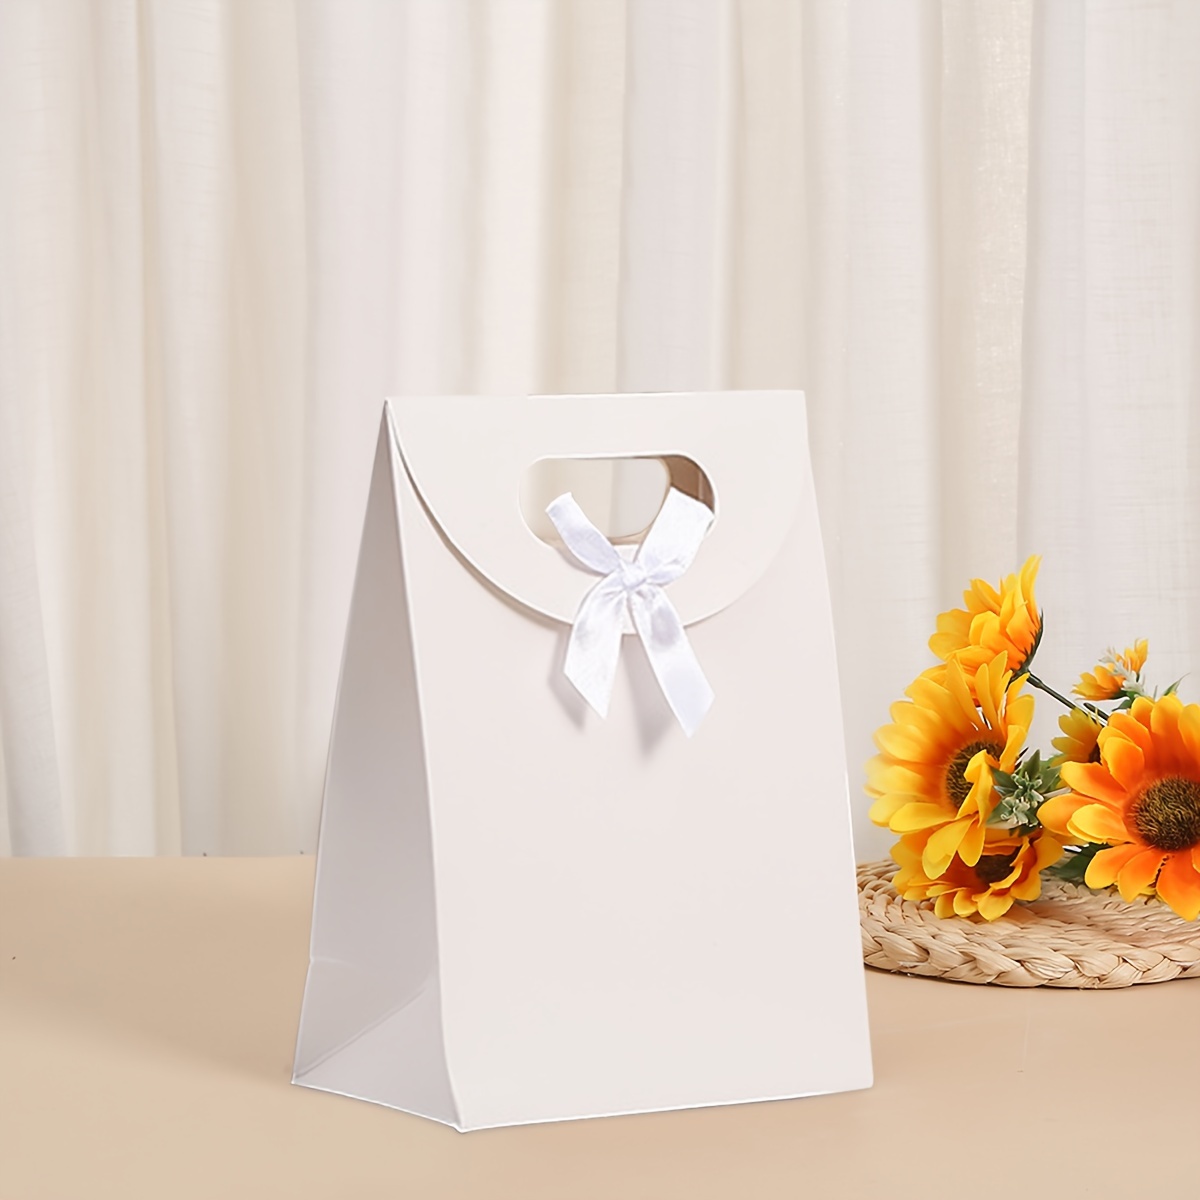 

12 Pcs White Paper Gift Bags With Bow - Perfect For Wedding, Bridal Showers, Birthdays, Anniversaries, Christmas, New Year, Valentine's Day, Graduation, And More!